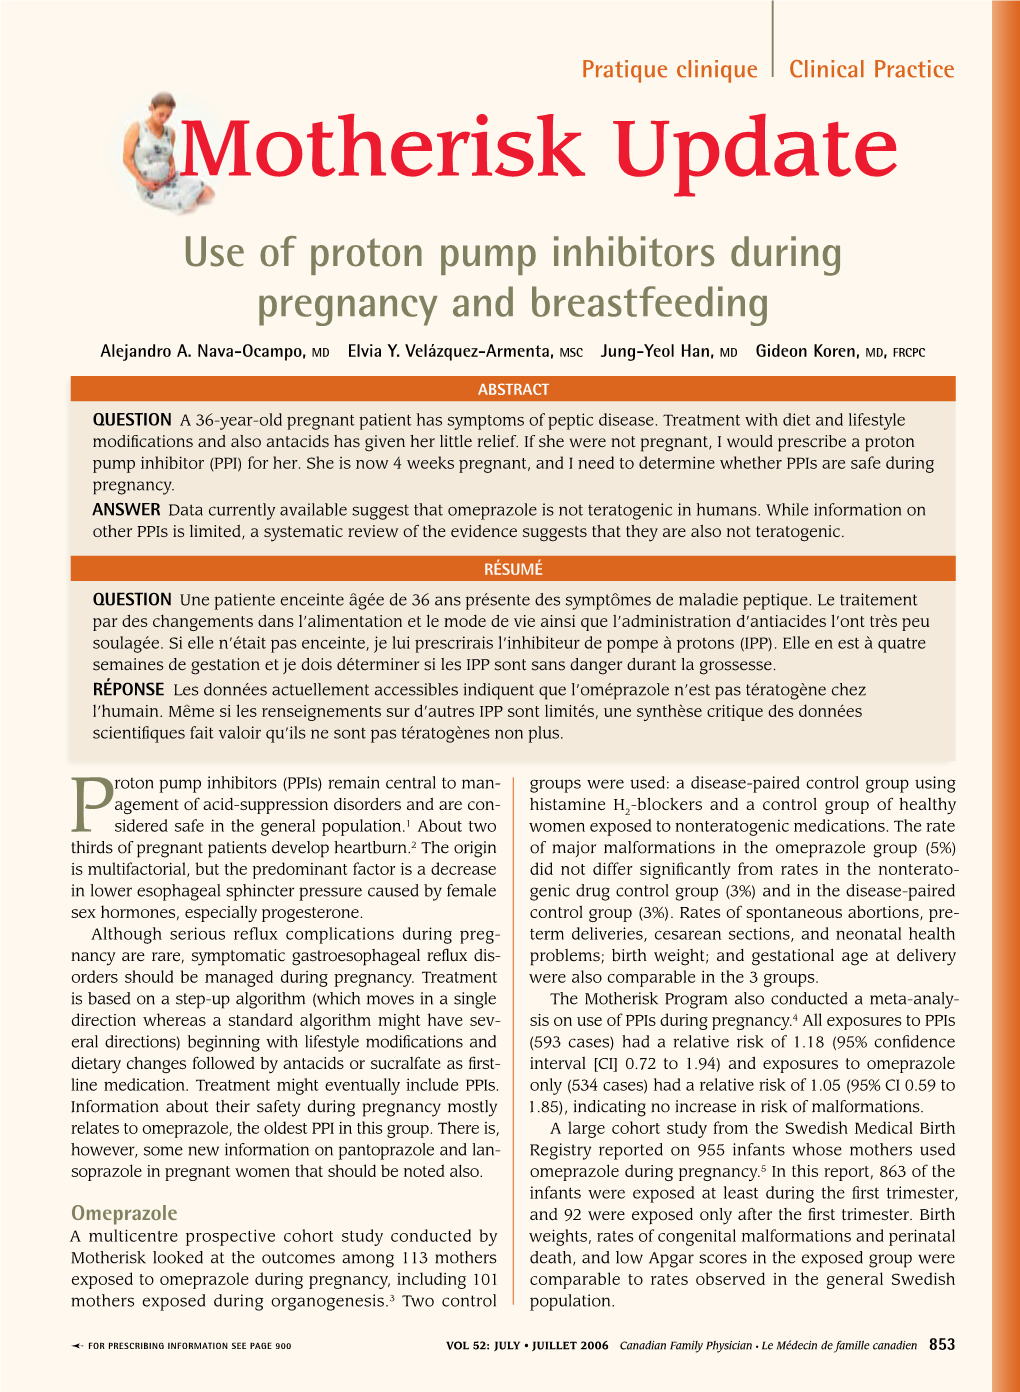 Use of Proton Pump Inhibitors During Pregnancy and Breastfeeding